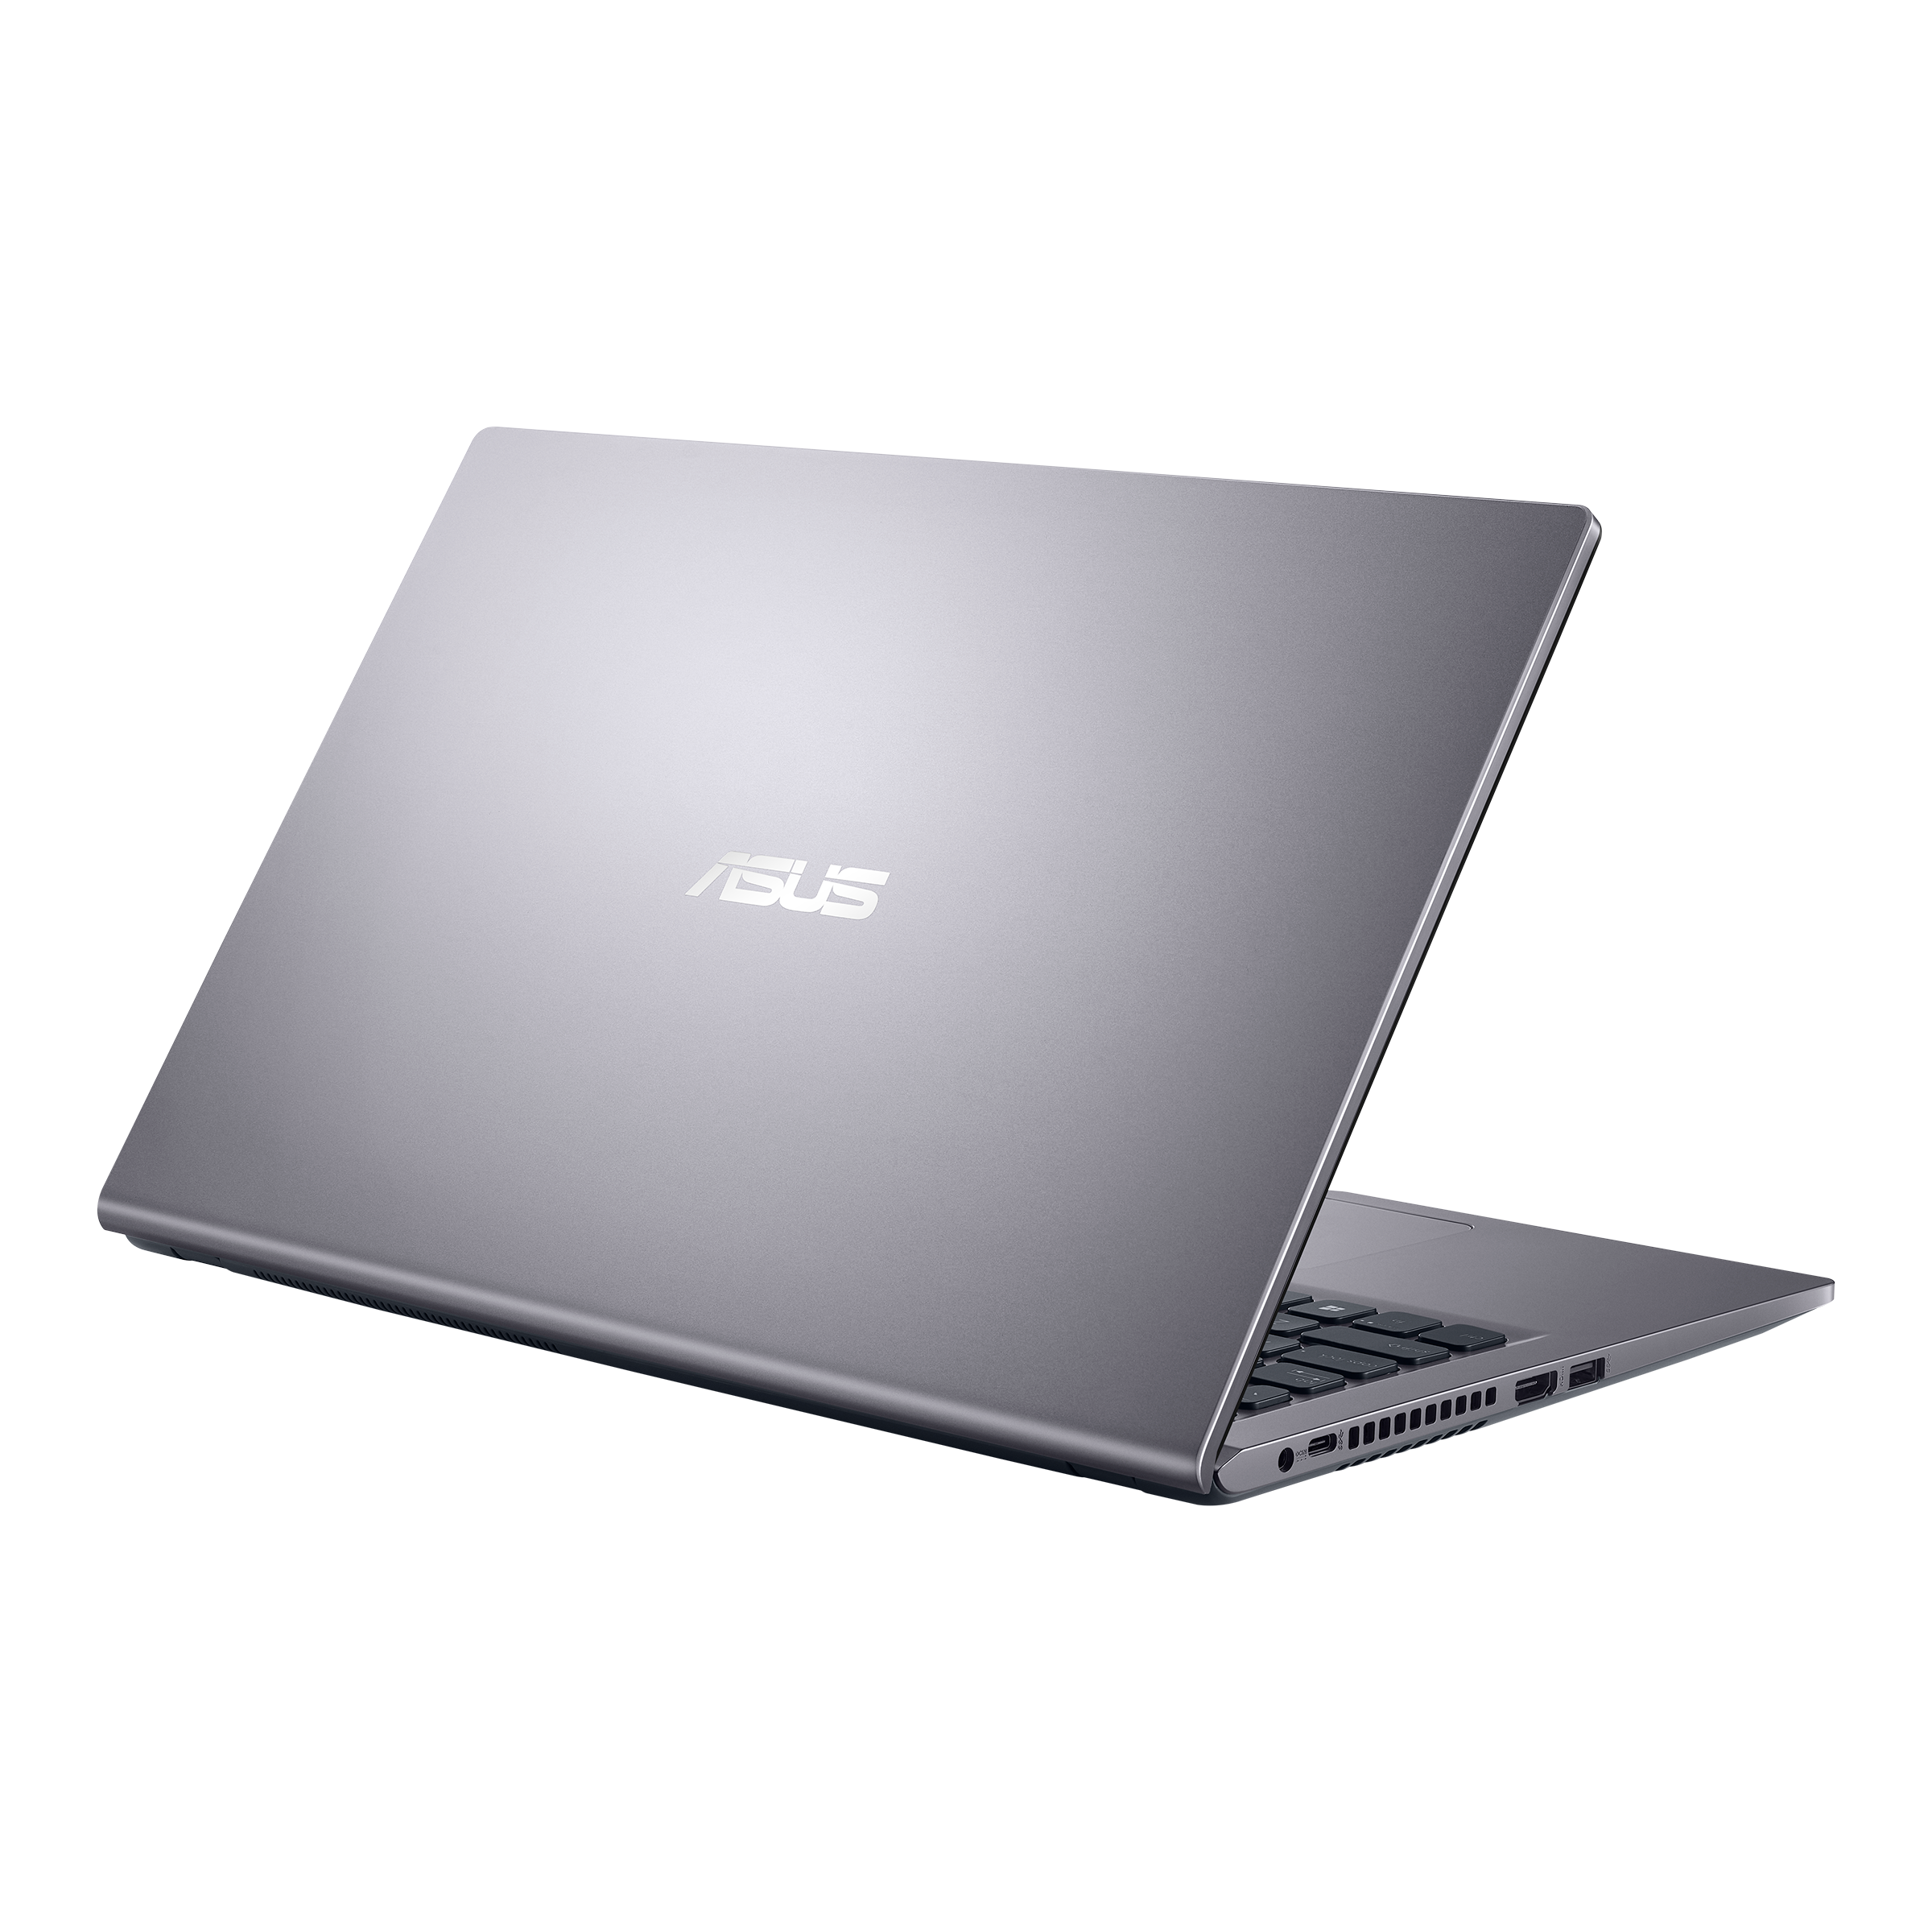 ASUS X515｜Laptops For Home｜ASUS Global